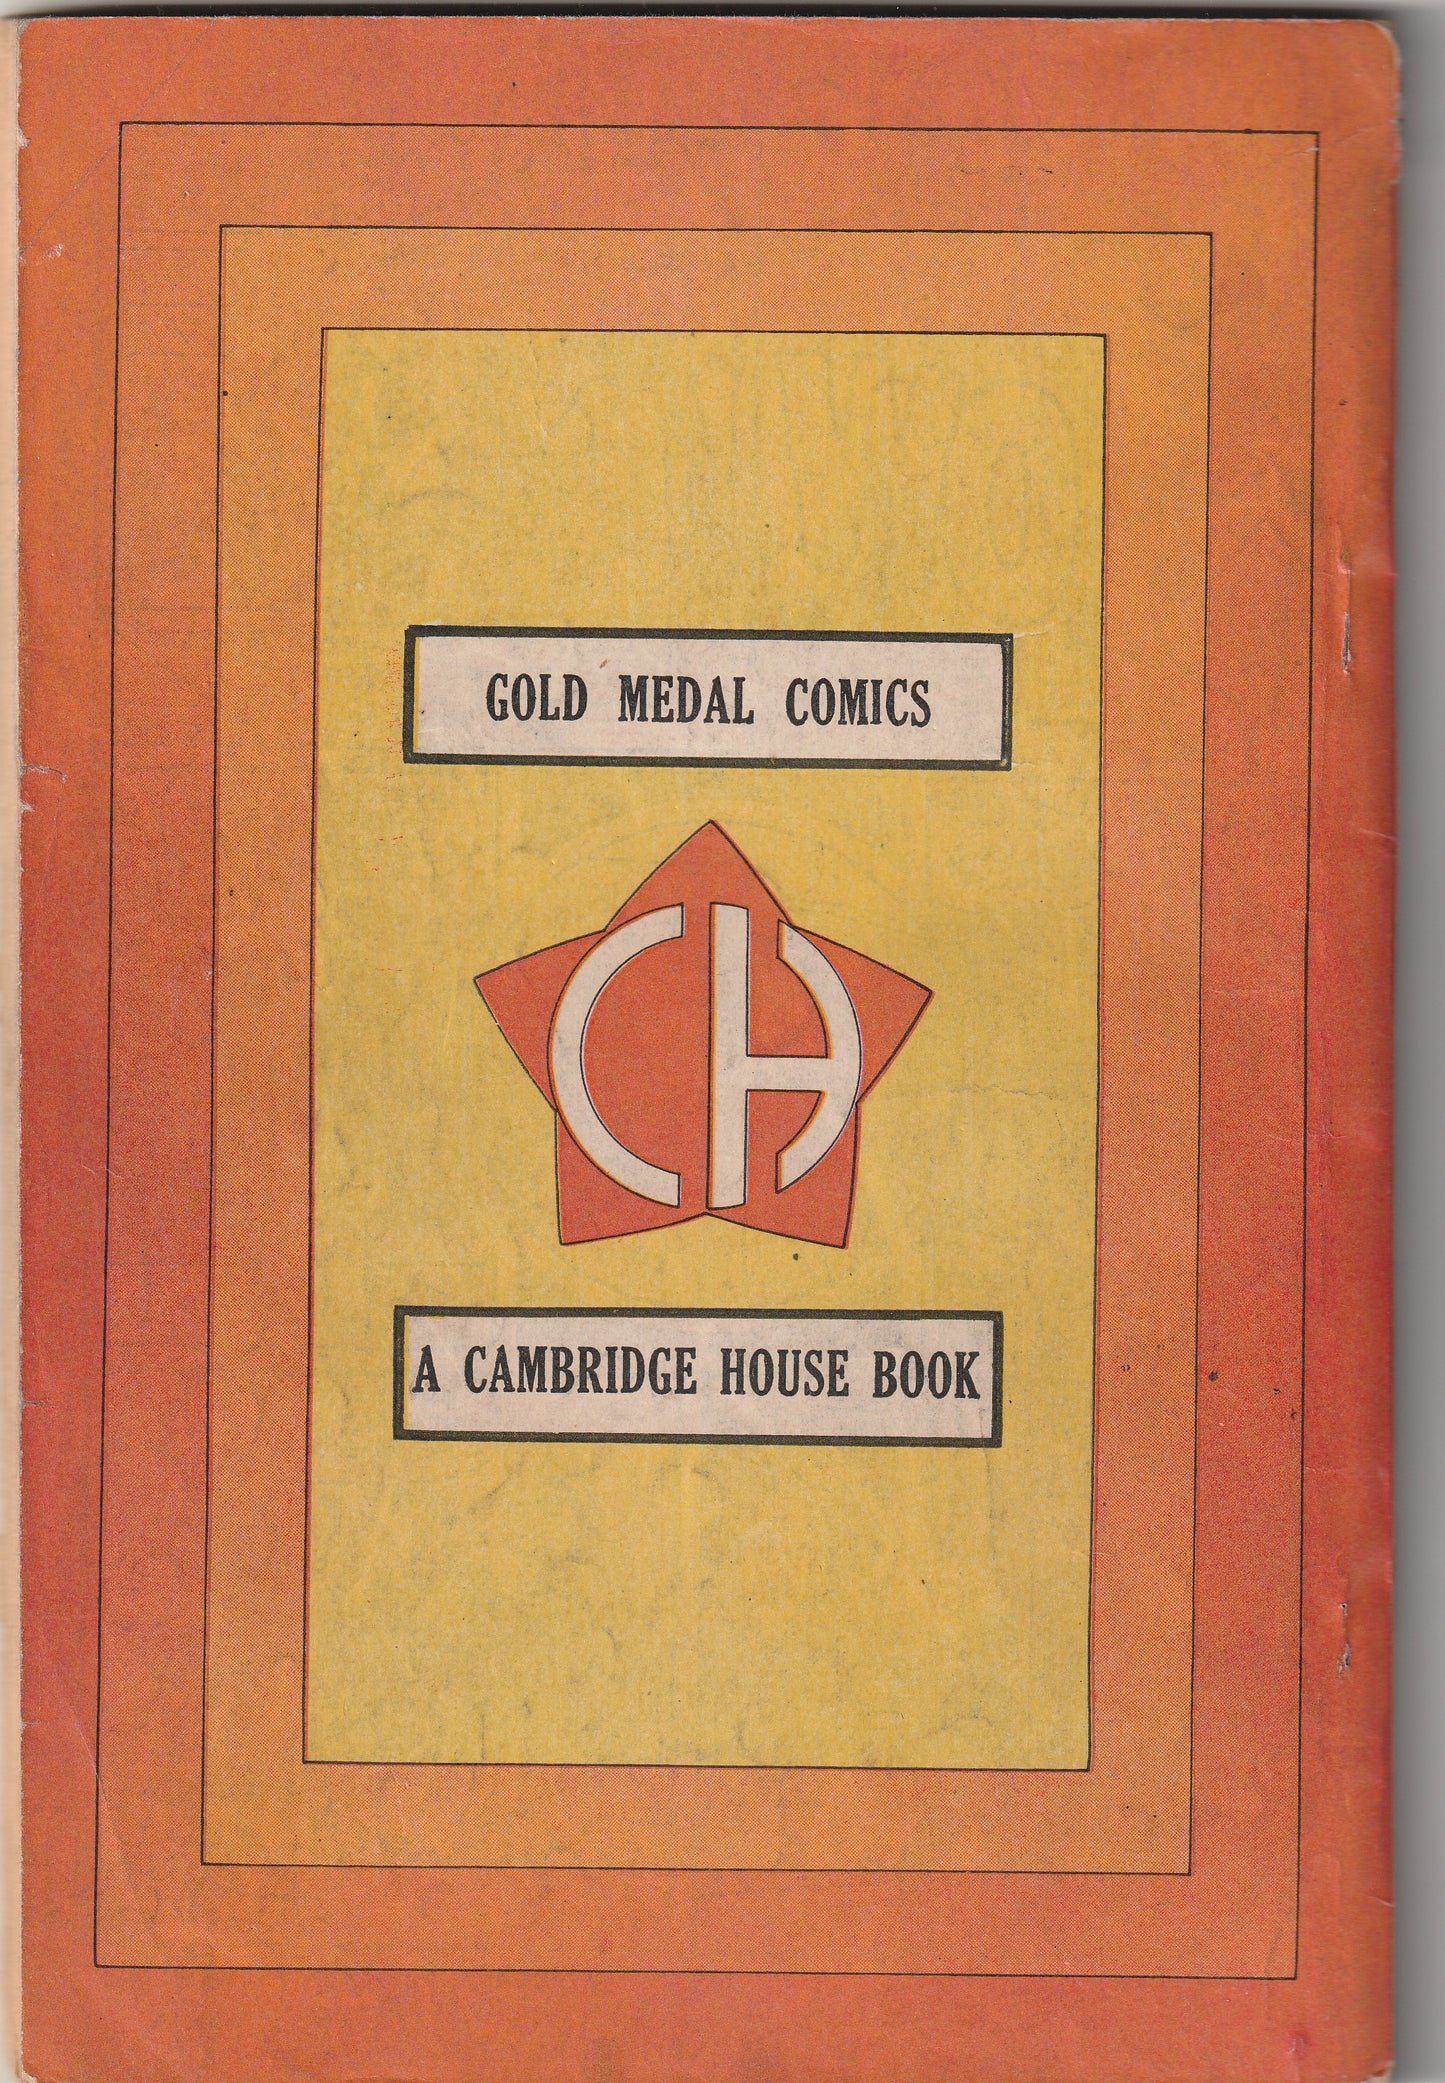 Gold Medal Comics (1945) - 128 pages, one-shot